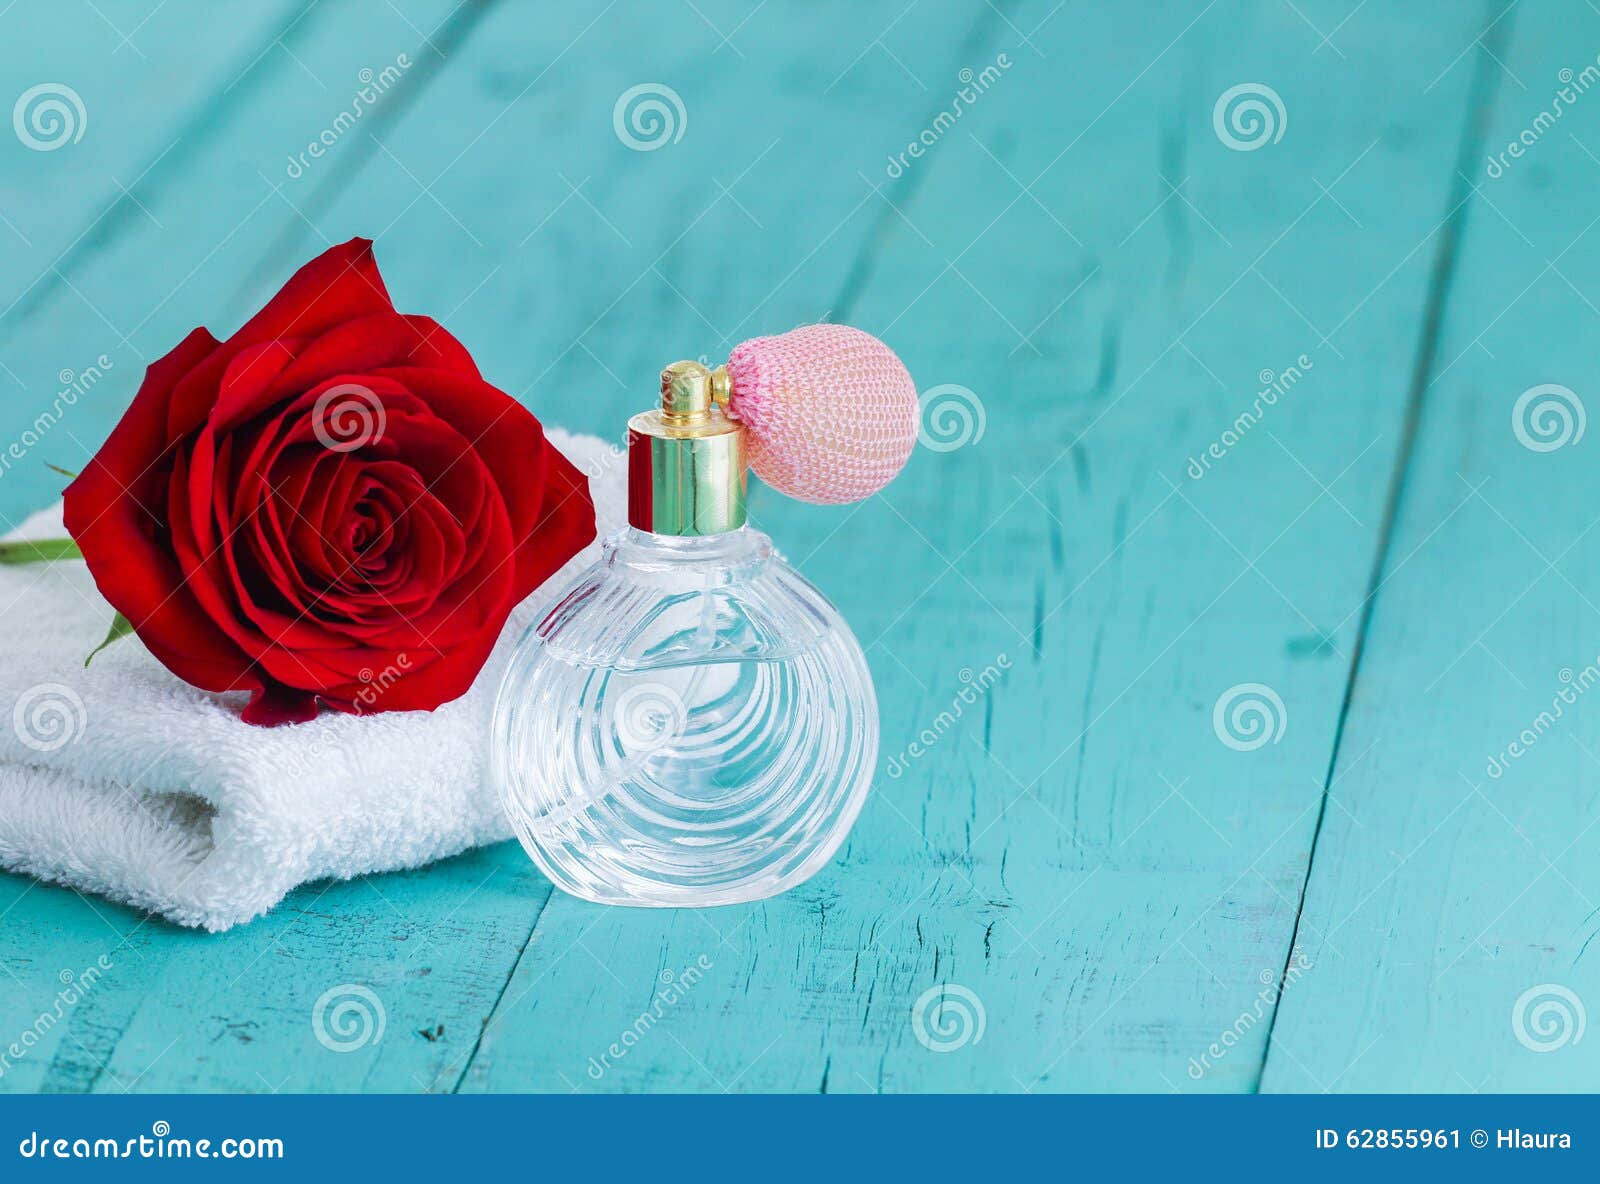 Single Red Rose and Perfume Bottle on Teal Blue Wood Background Stock